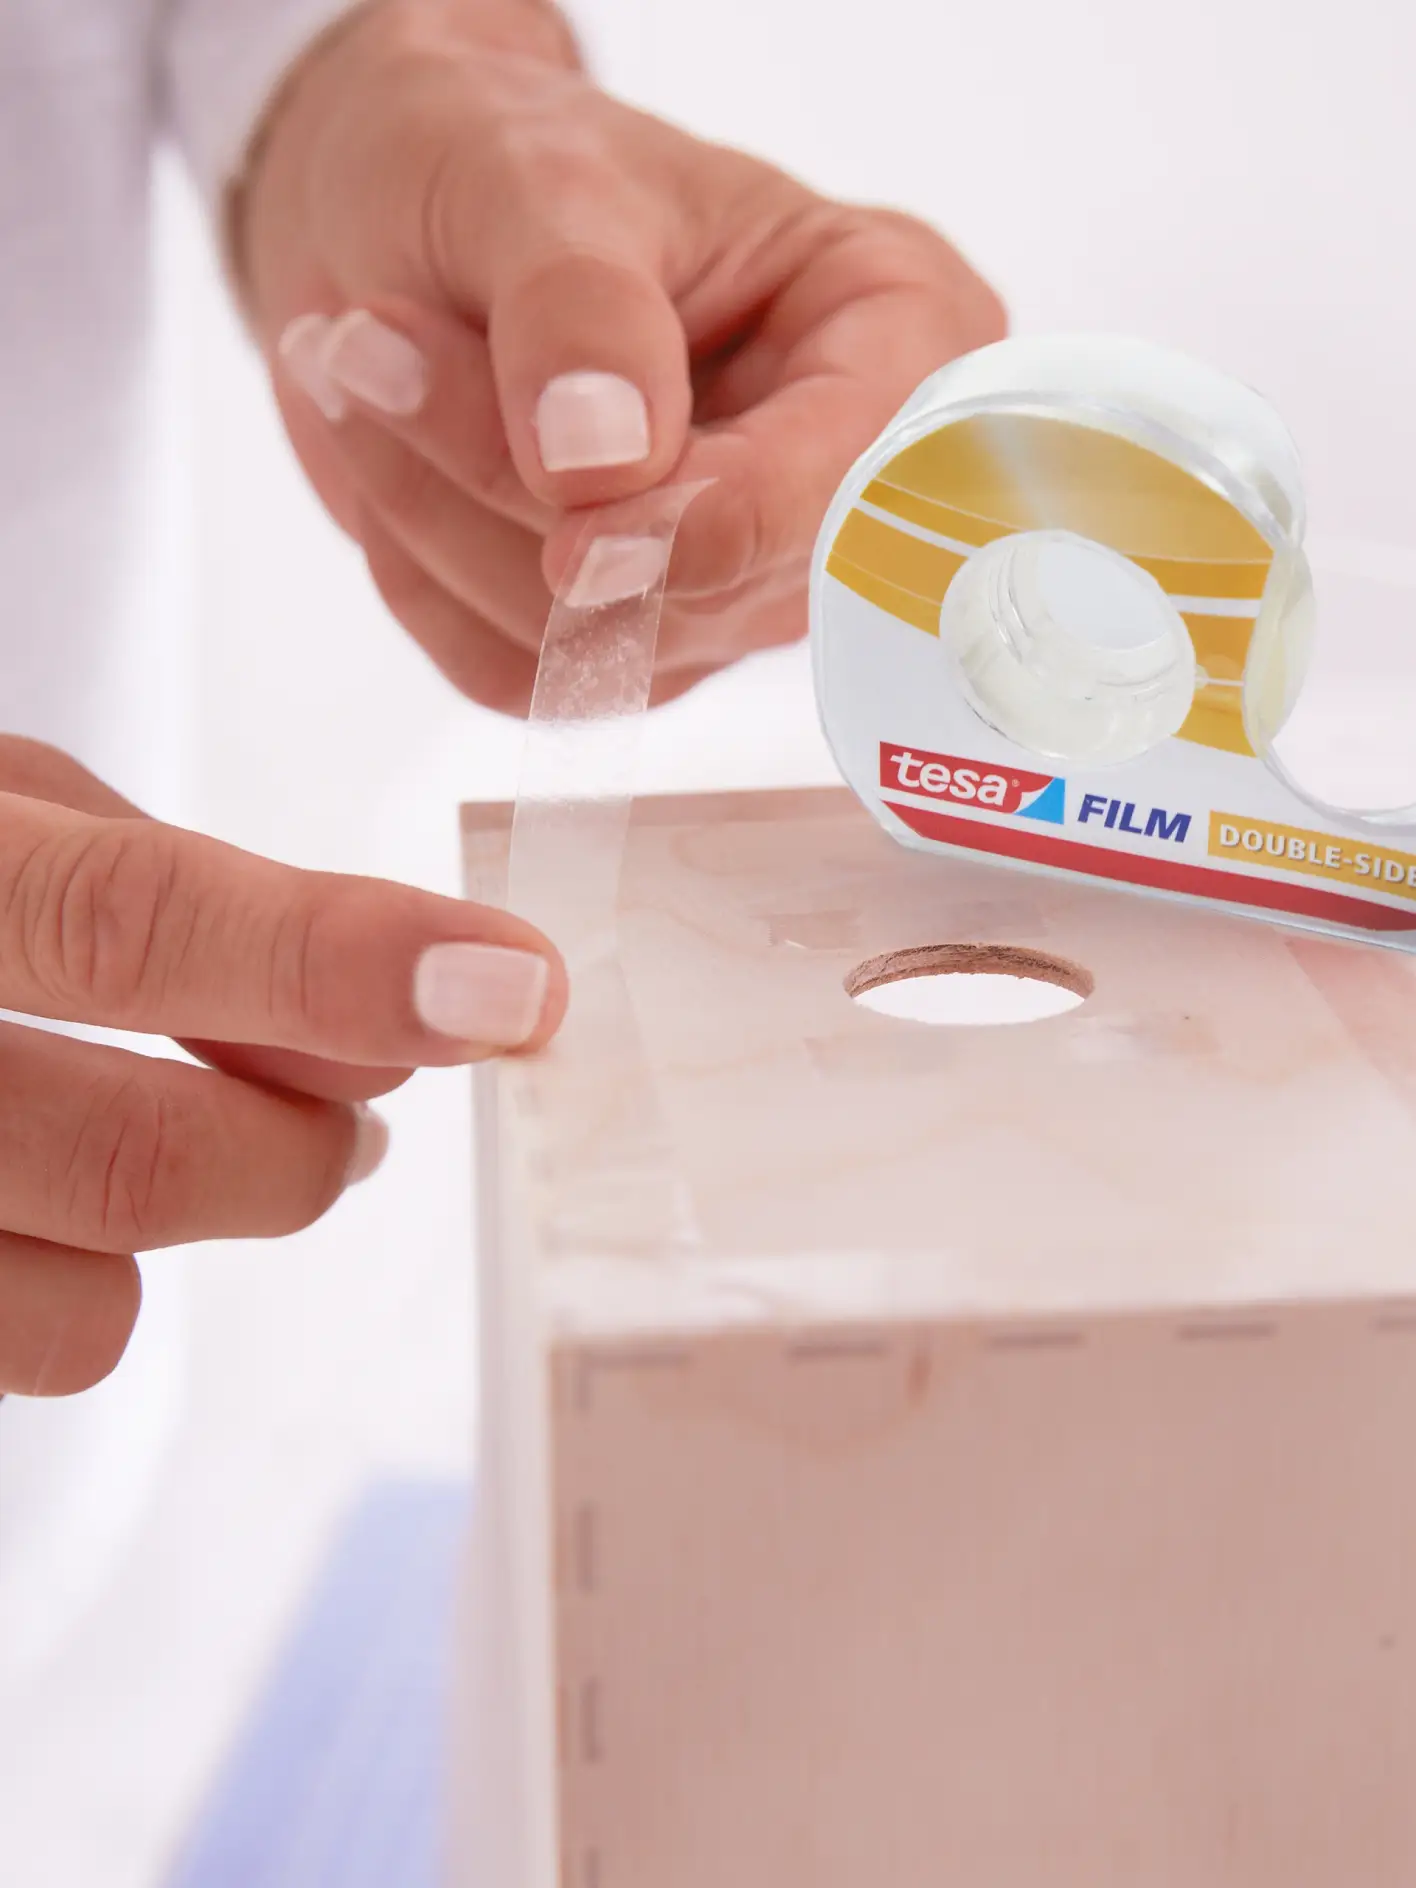 Now apply the tesafilm® double-sided tape to the edges and around the hole.